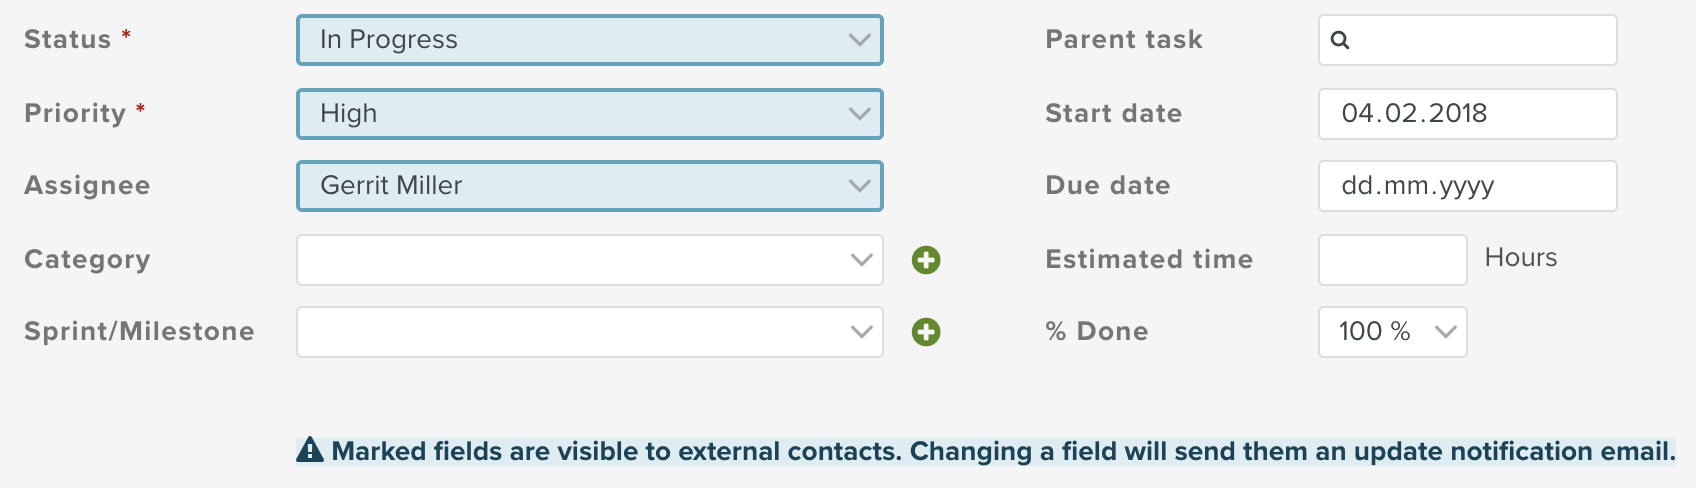 issue_attributes_visible_to_contacts@2x.png